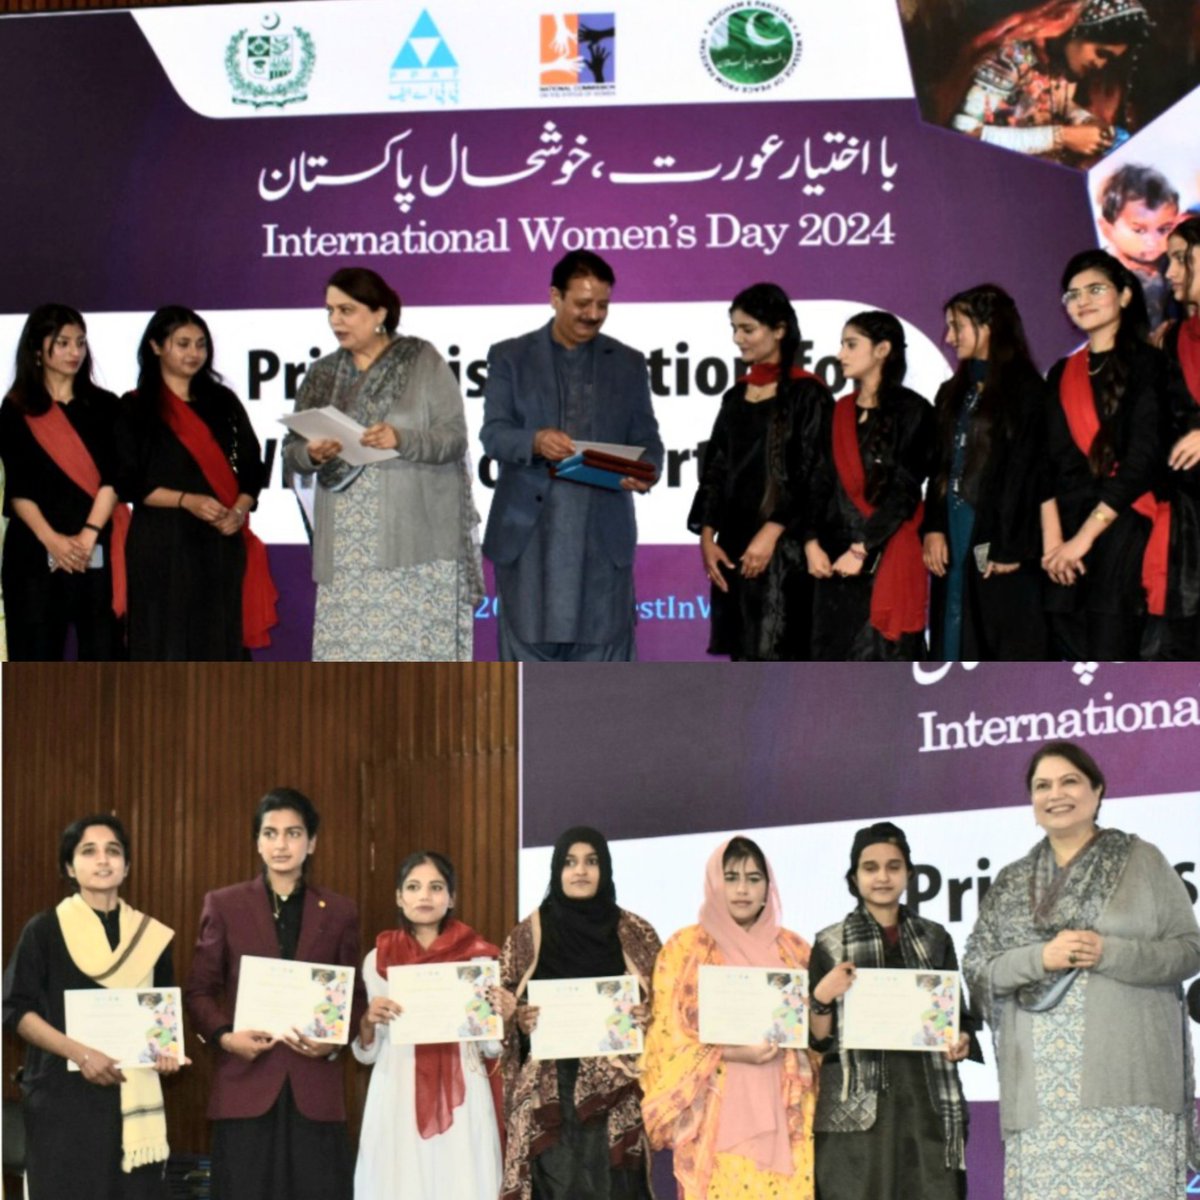 NCSW,PPAF & Dukhtran Pakistan hosted National Women's Conference to celebrate women & their journeys of success. Students from women's colleges in RWP & ISB also competed in drama acts on the theme of #Womenempowerment mesmerizing the audience with their creativity & passion.